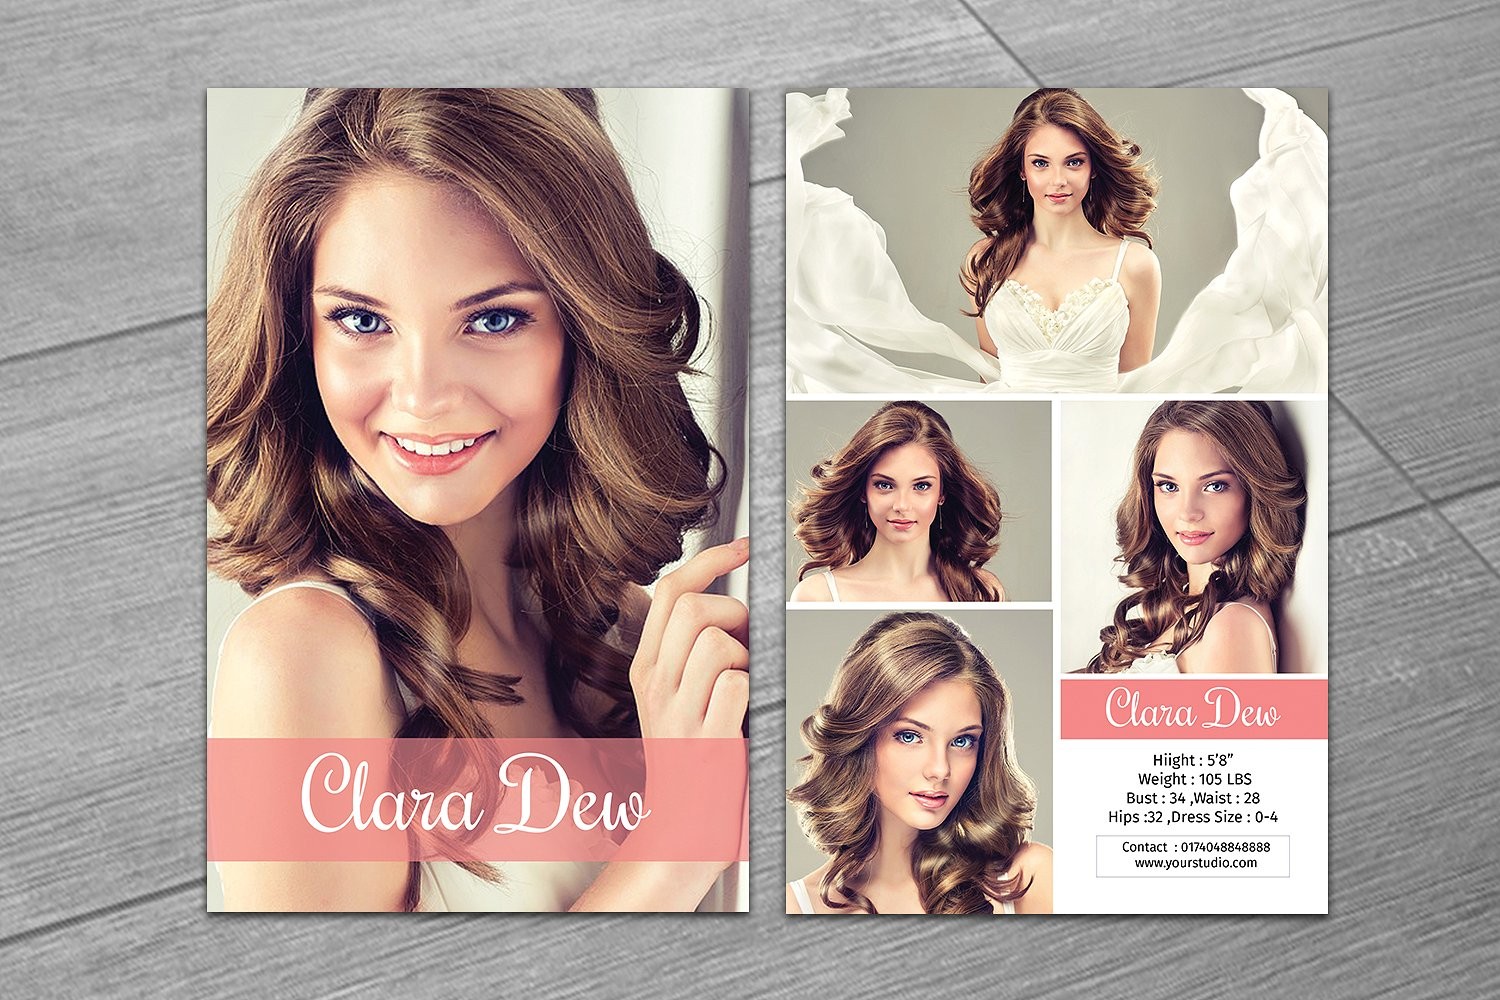 Model Comp Card Template Photos Graphics Fonts Themes Templates